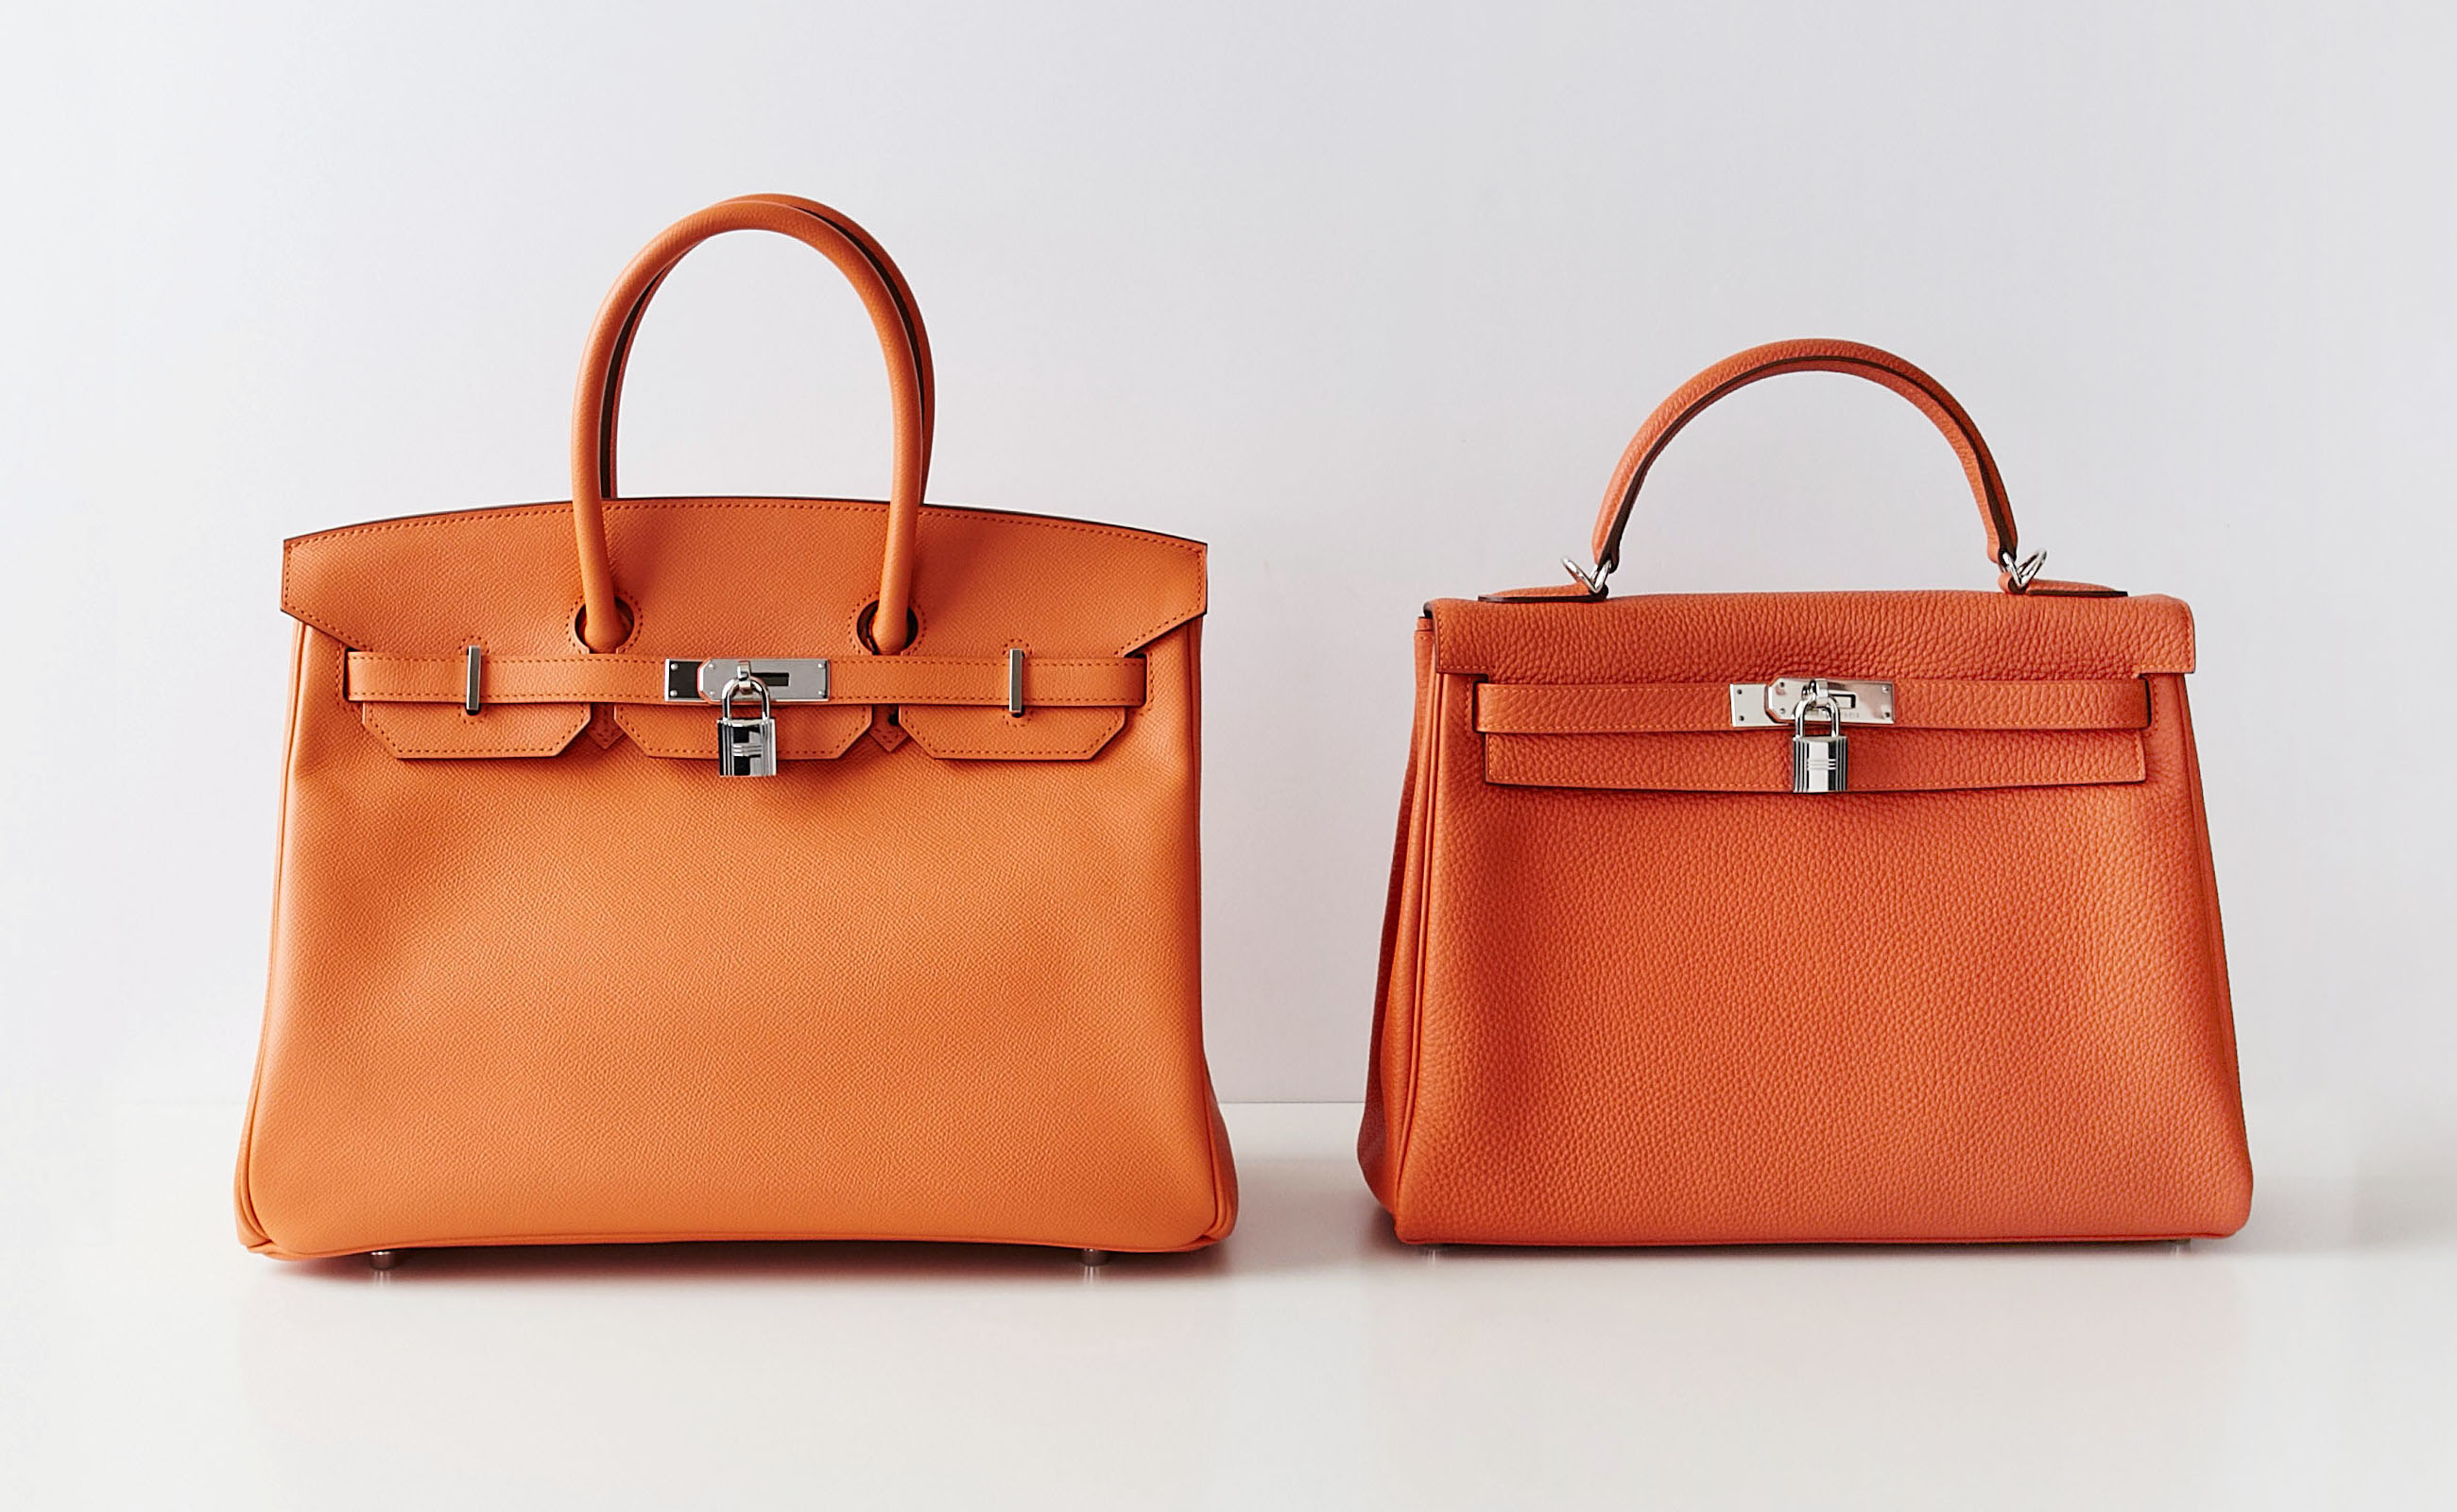 How To Tell The Difference Between an Hermes Birkin vs Kelly Bag | YoogisCloset.com